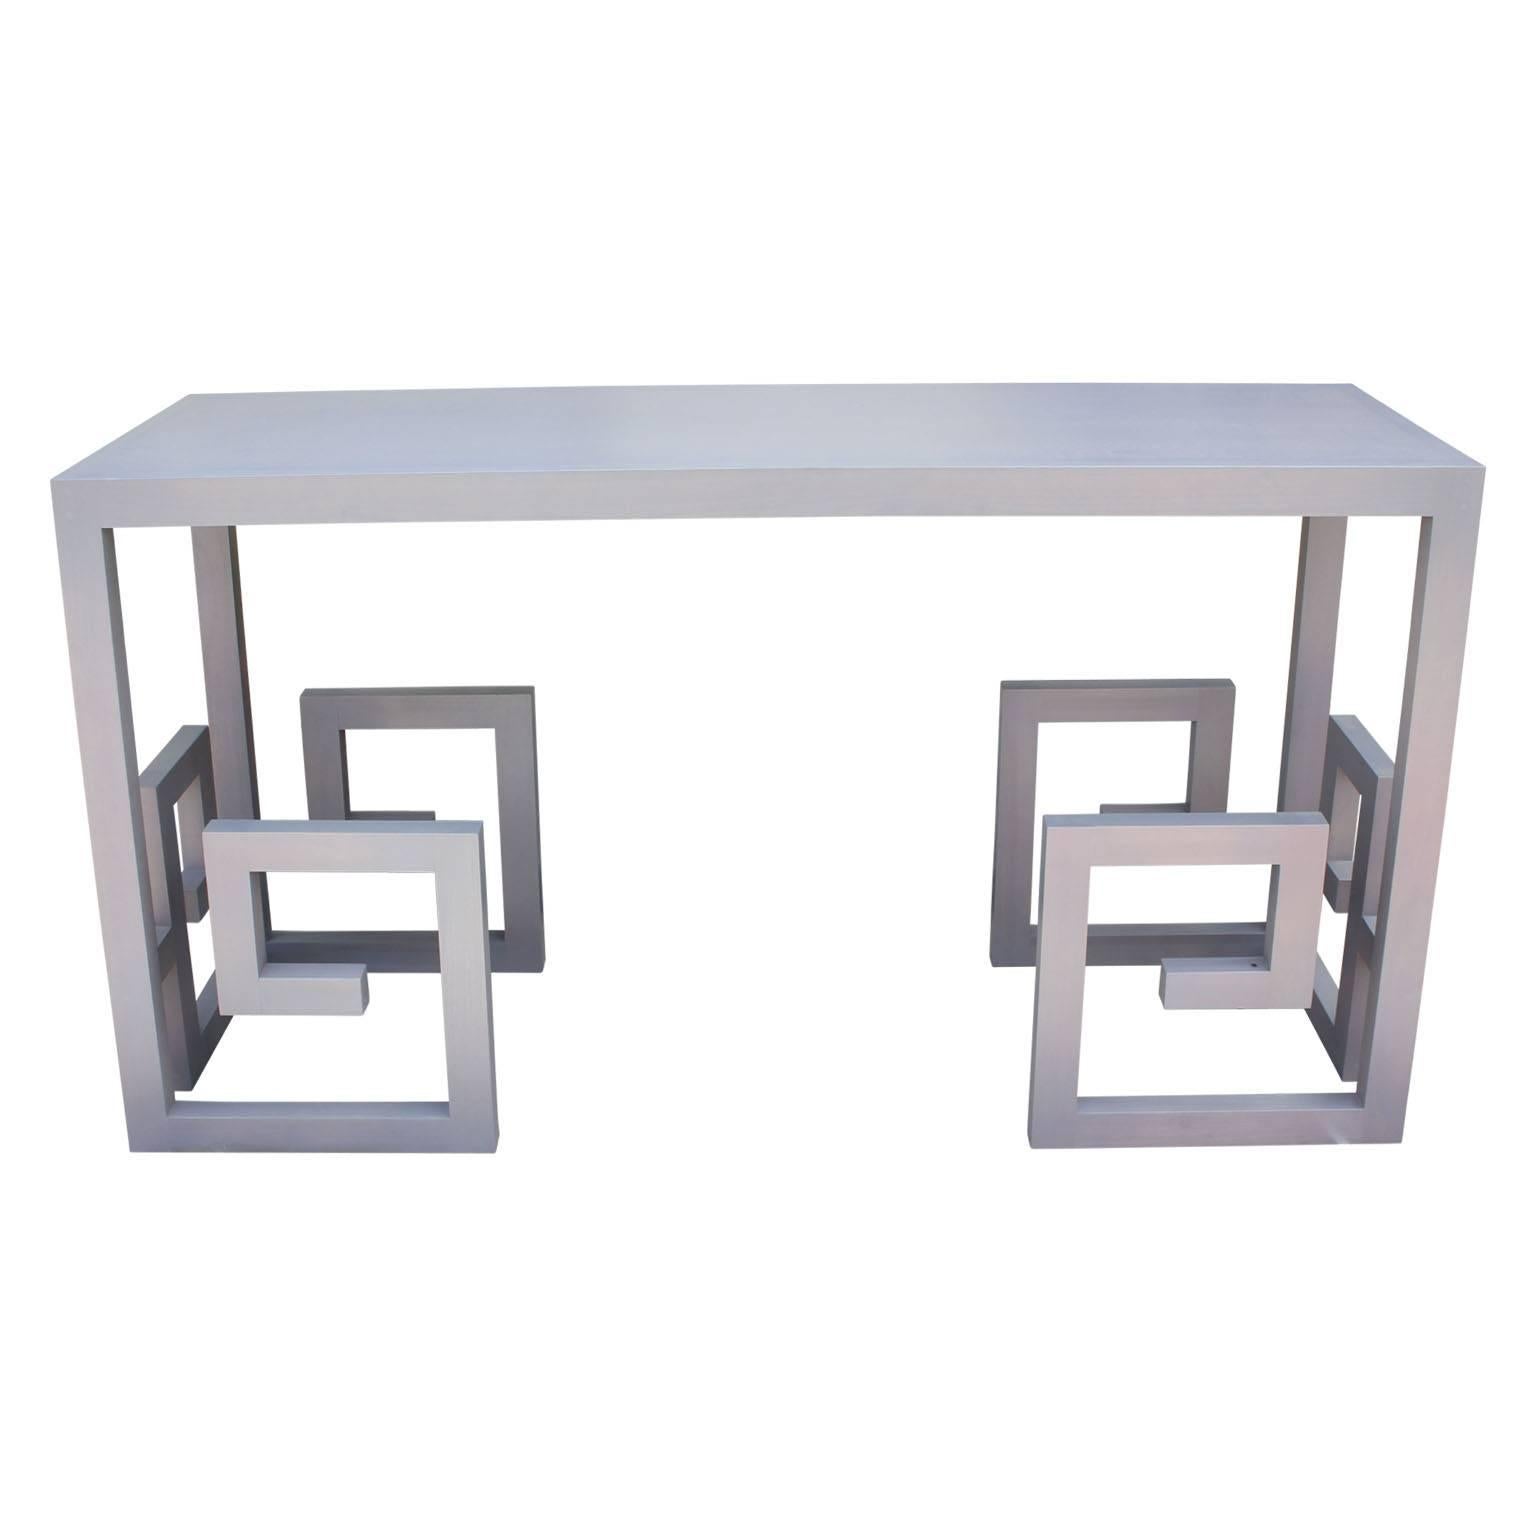 Unique Greek key console table in a light grey, custom-made. Perfect for an entry way or entertainment center.